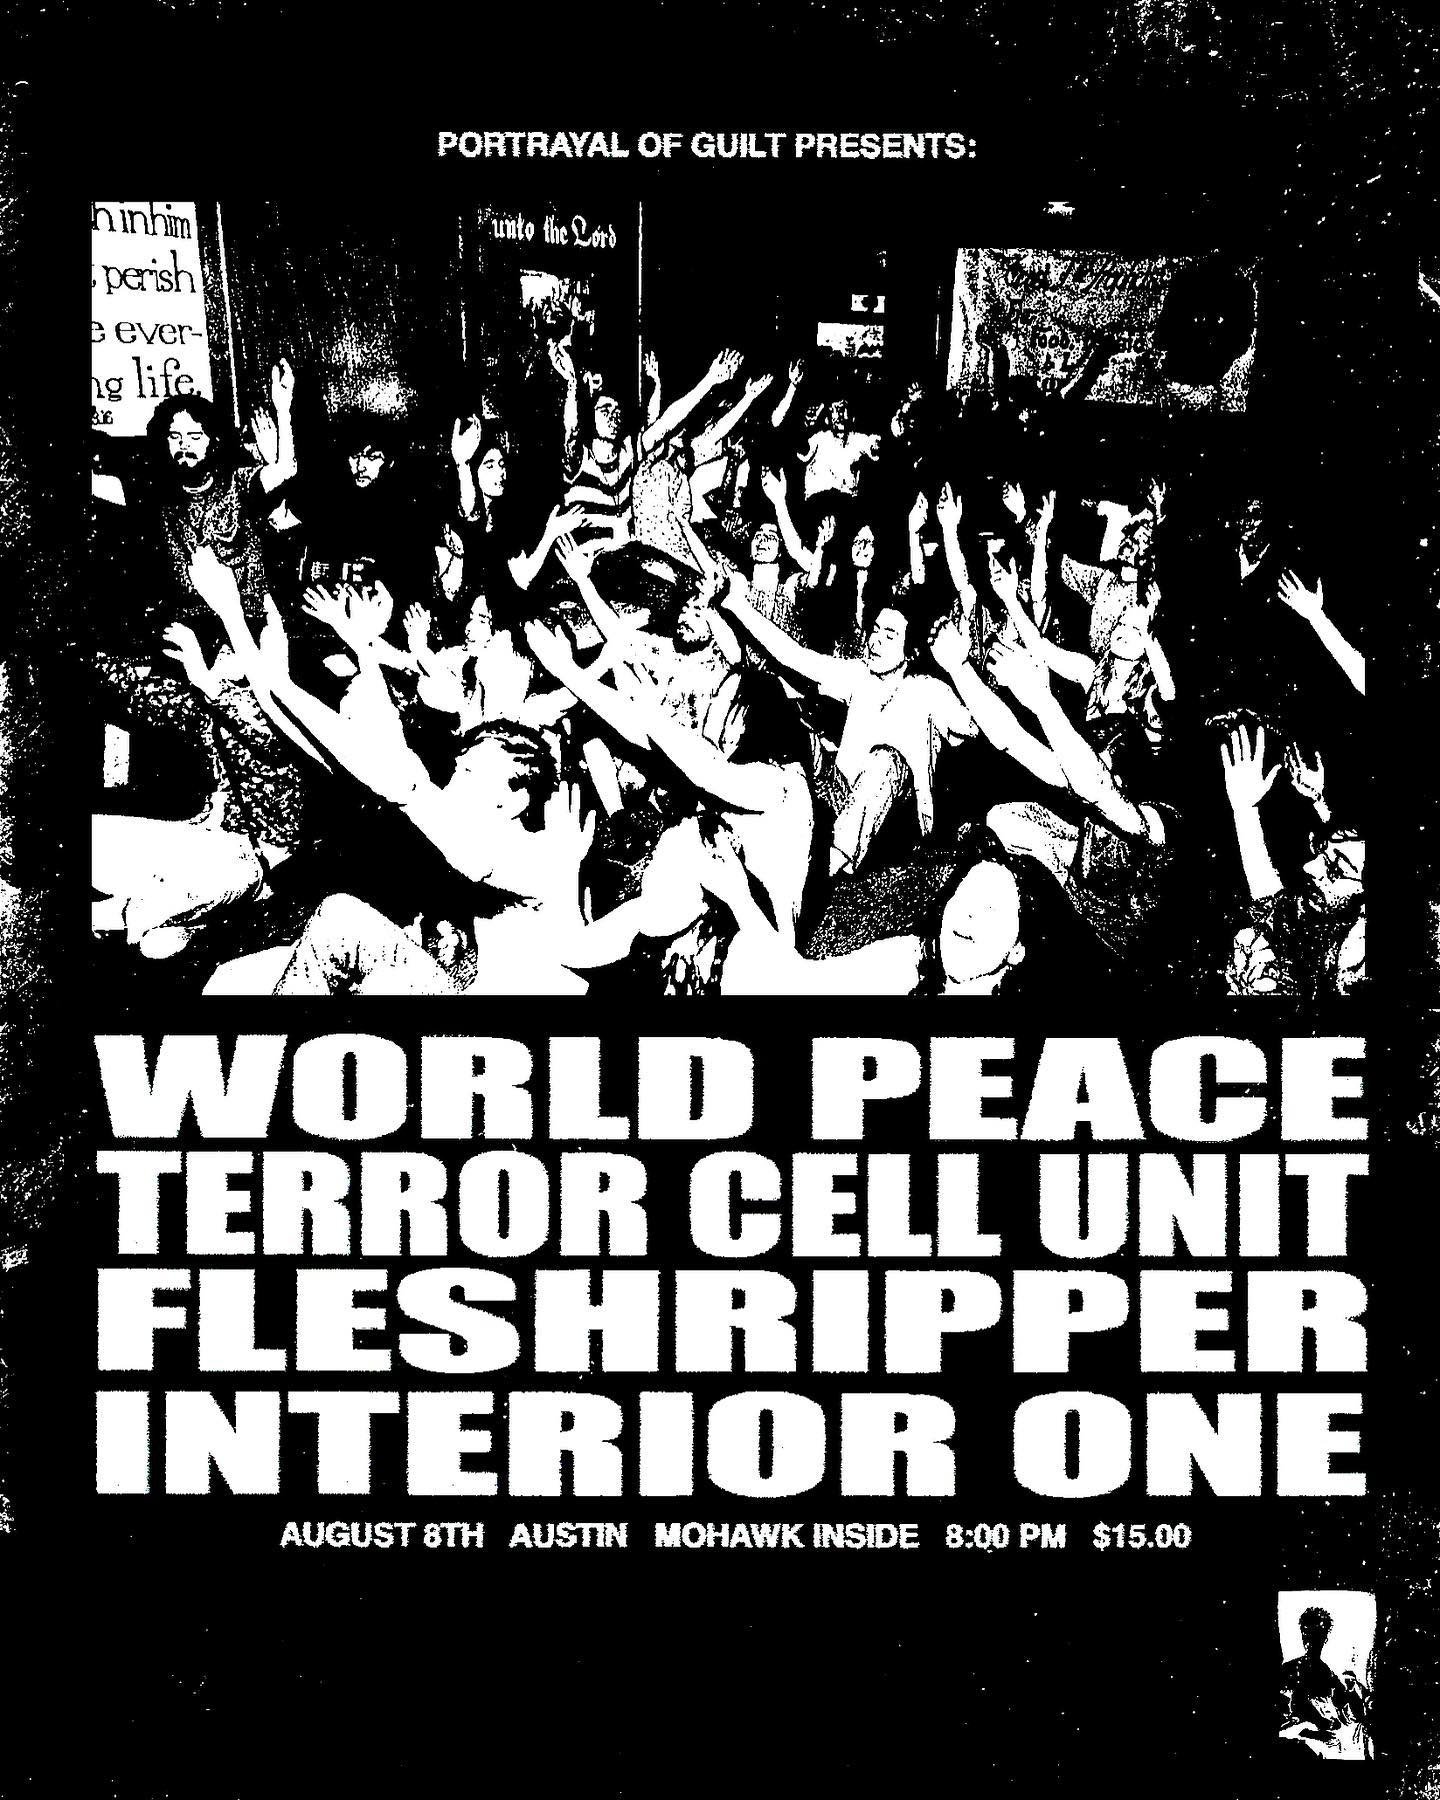 PORTRAYAL OF GUILT PRESENTS&hellip;

WORLD PEACE (Oakland, CA)
TERROR CELL UNIT (Oakland, CA)
FLESHRIPPER
INTERIOR ONE

AUG 8
MOHAWK INSIDE
DOORS AT 8PM
$15

TICKET LINK IN BIO